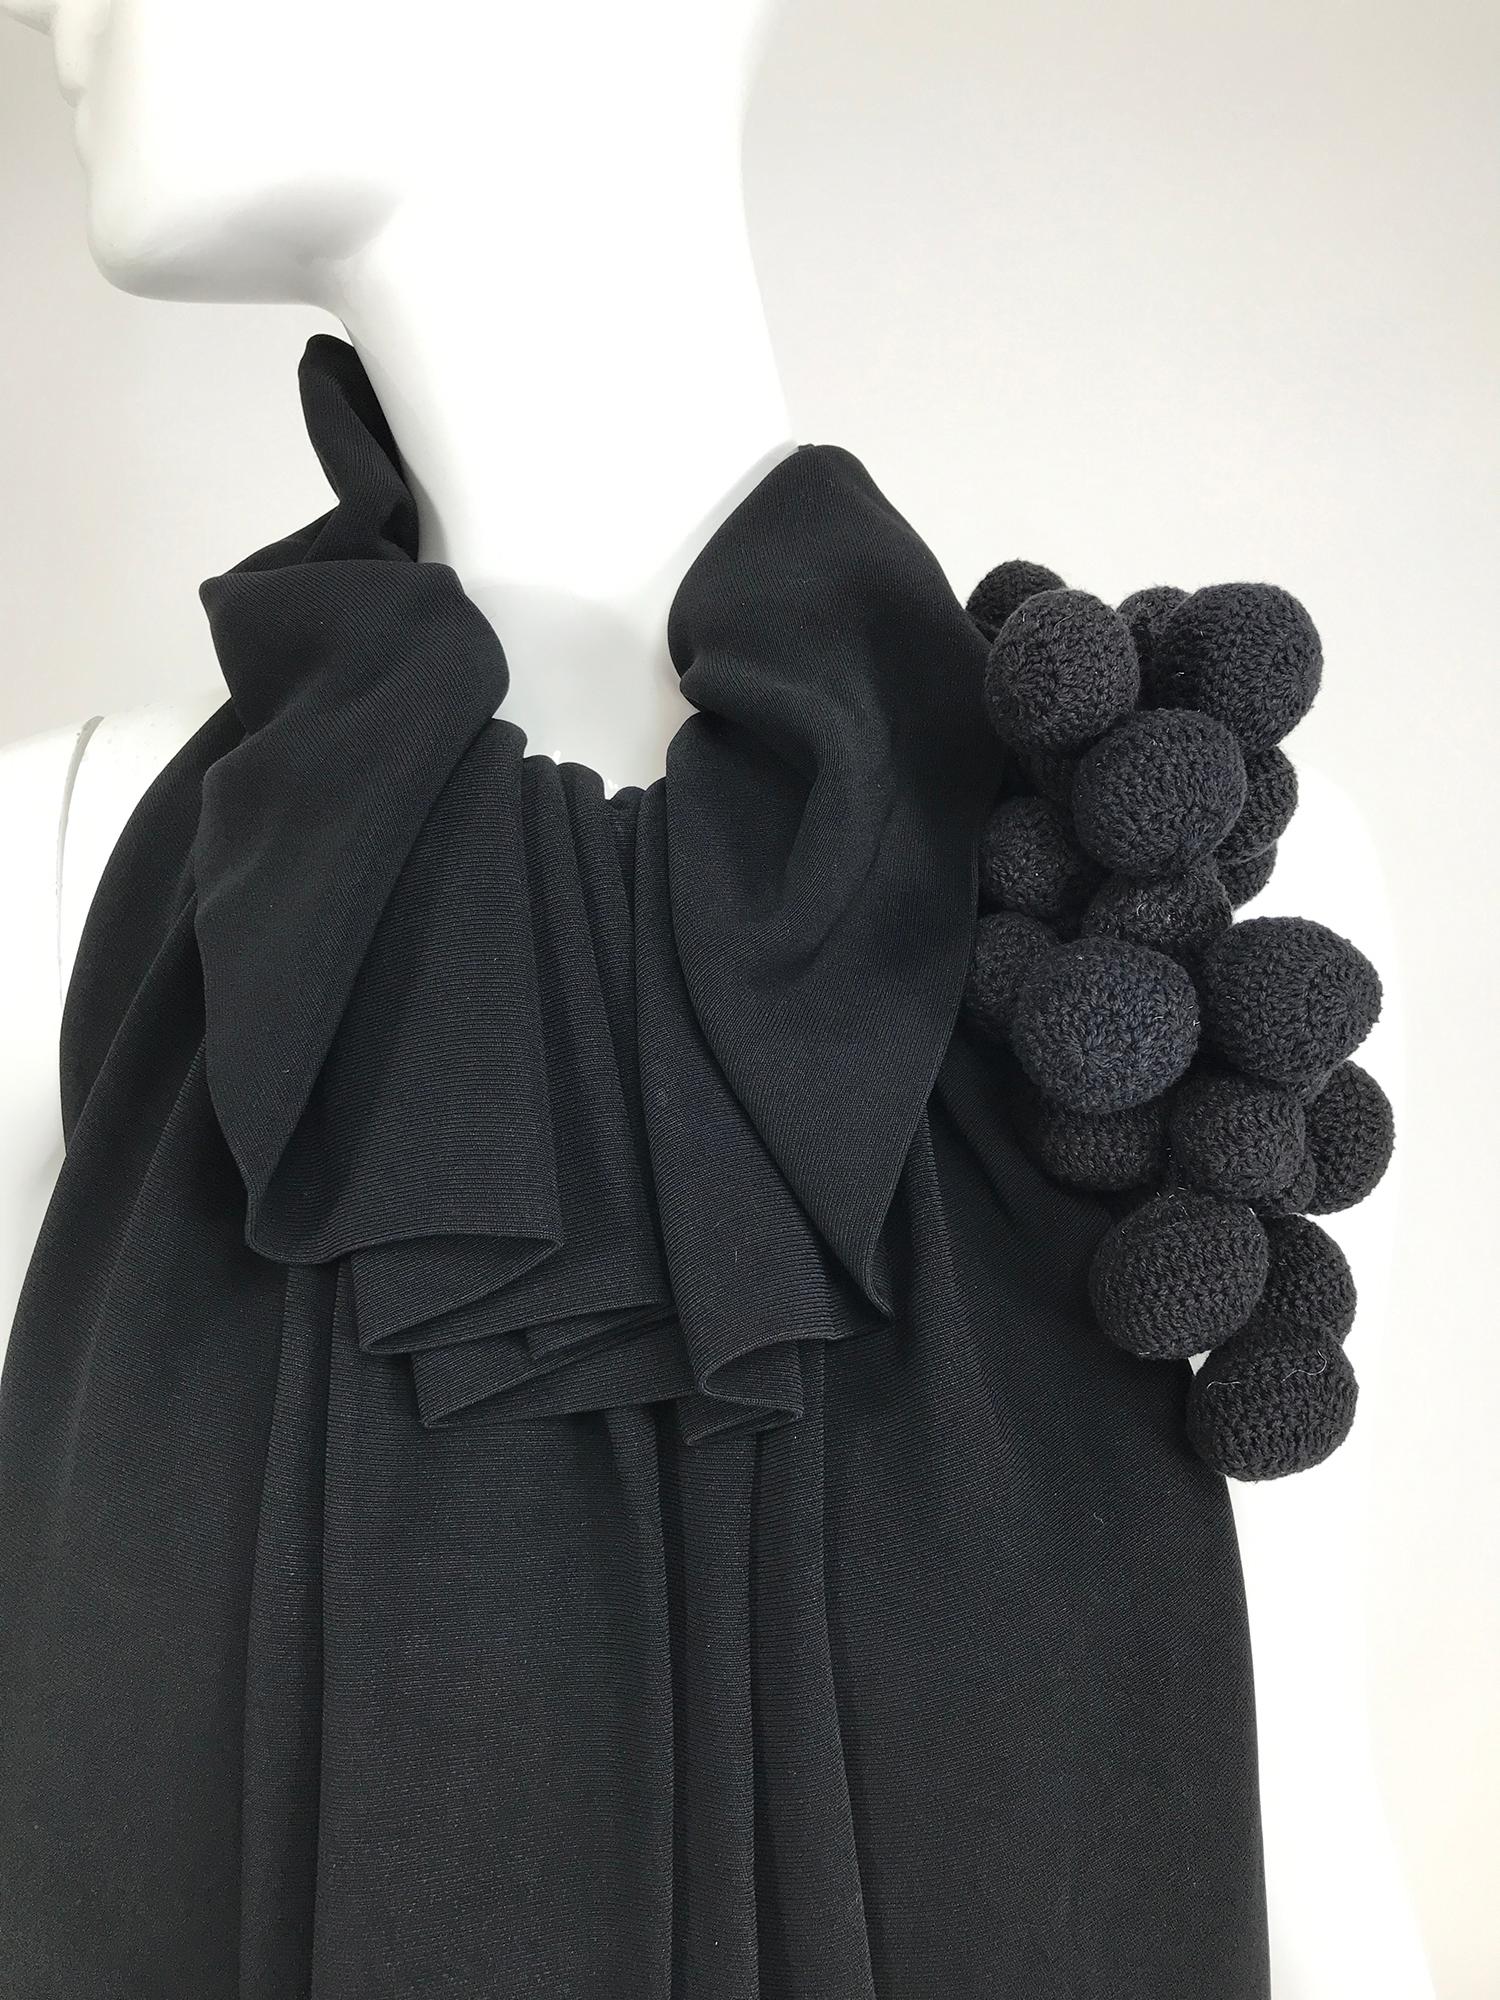 Martin Grant black sleeveless gathered tunic top with a neck corsage of crochet black balls. Racer neck top is gathered at the neck with a ruffle, open gathers fall full to the hem. The top closes at the neck back with hook & eyes.  Unlined, a cute